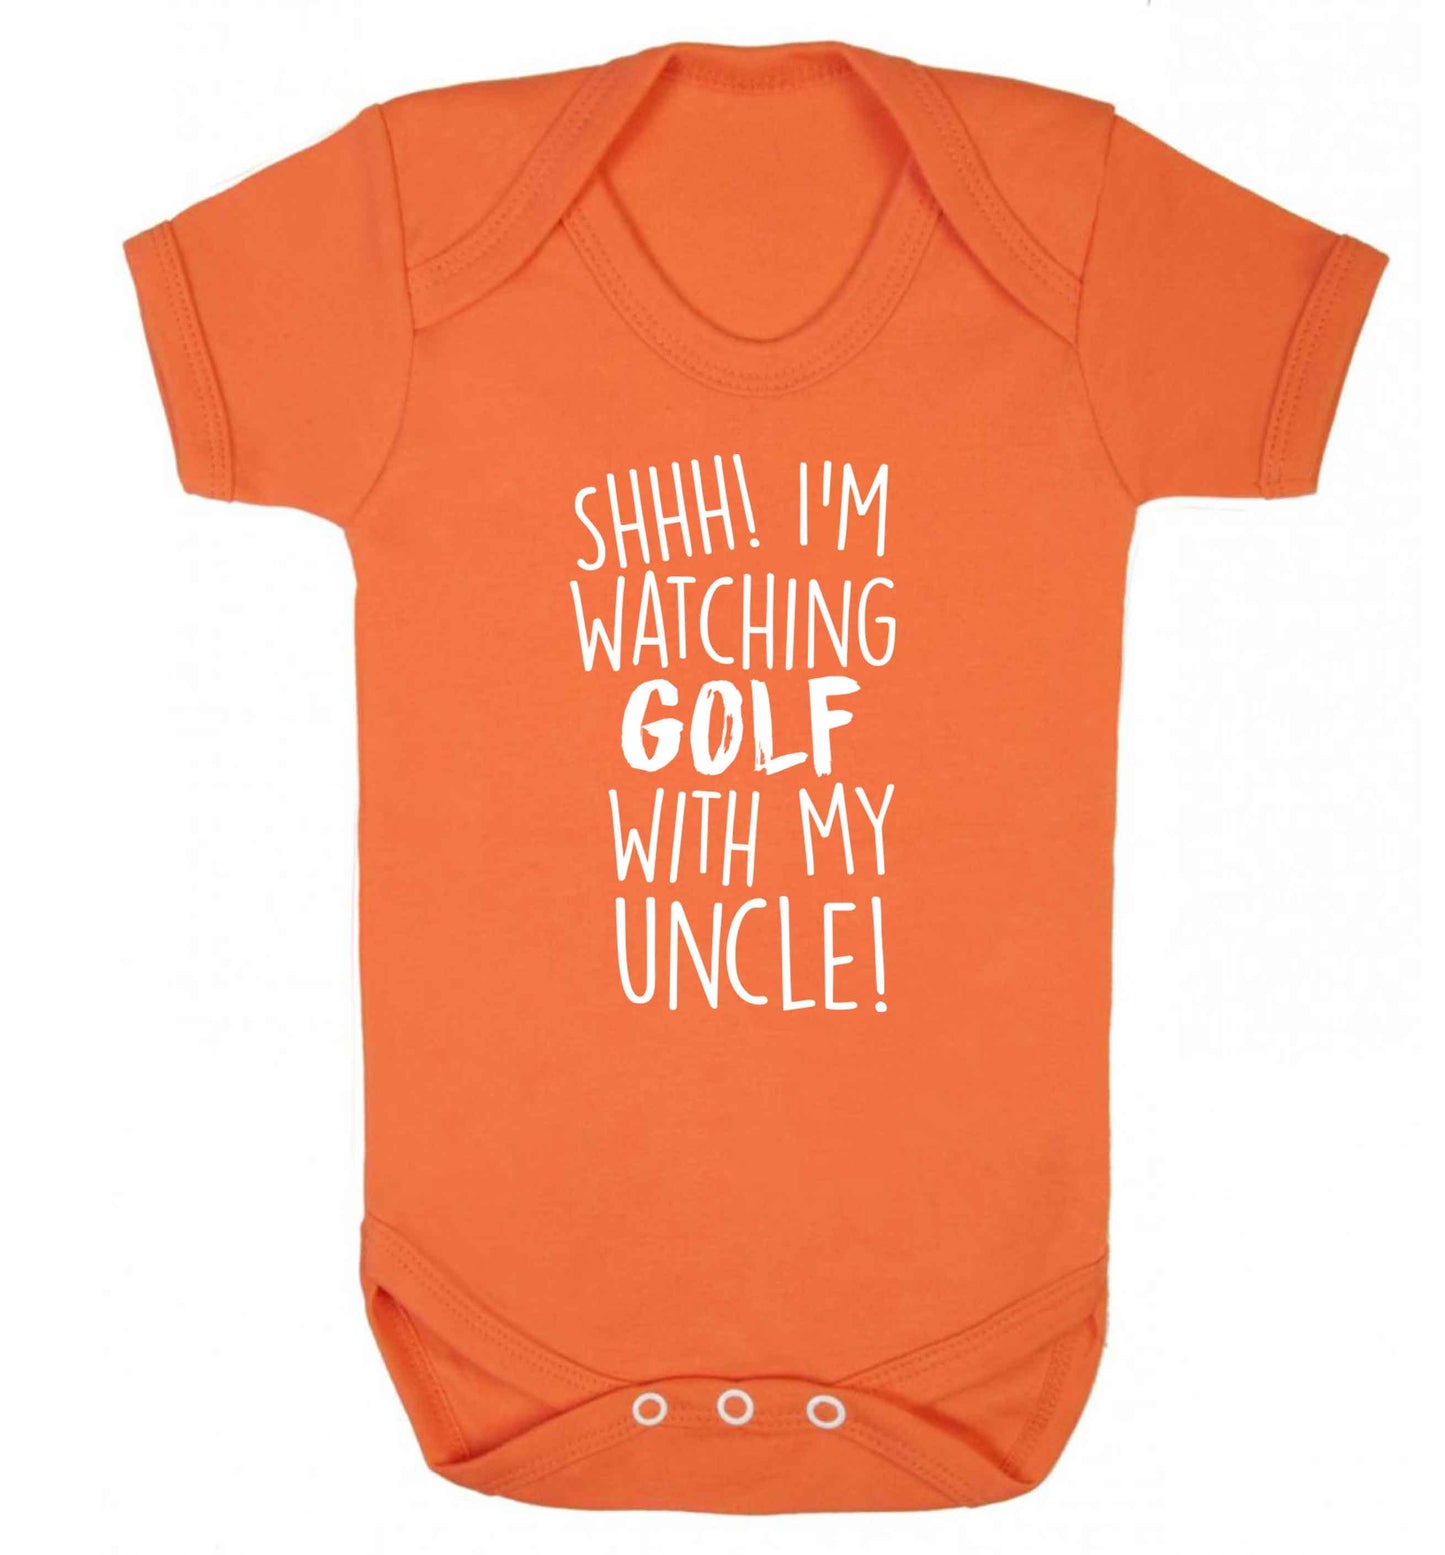 Shh I'm watching golf with my uncle Baby Vest orange 18-24 months